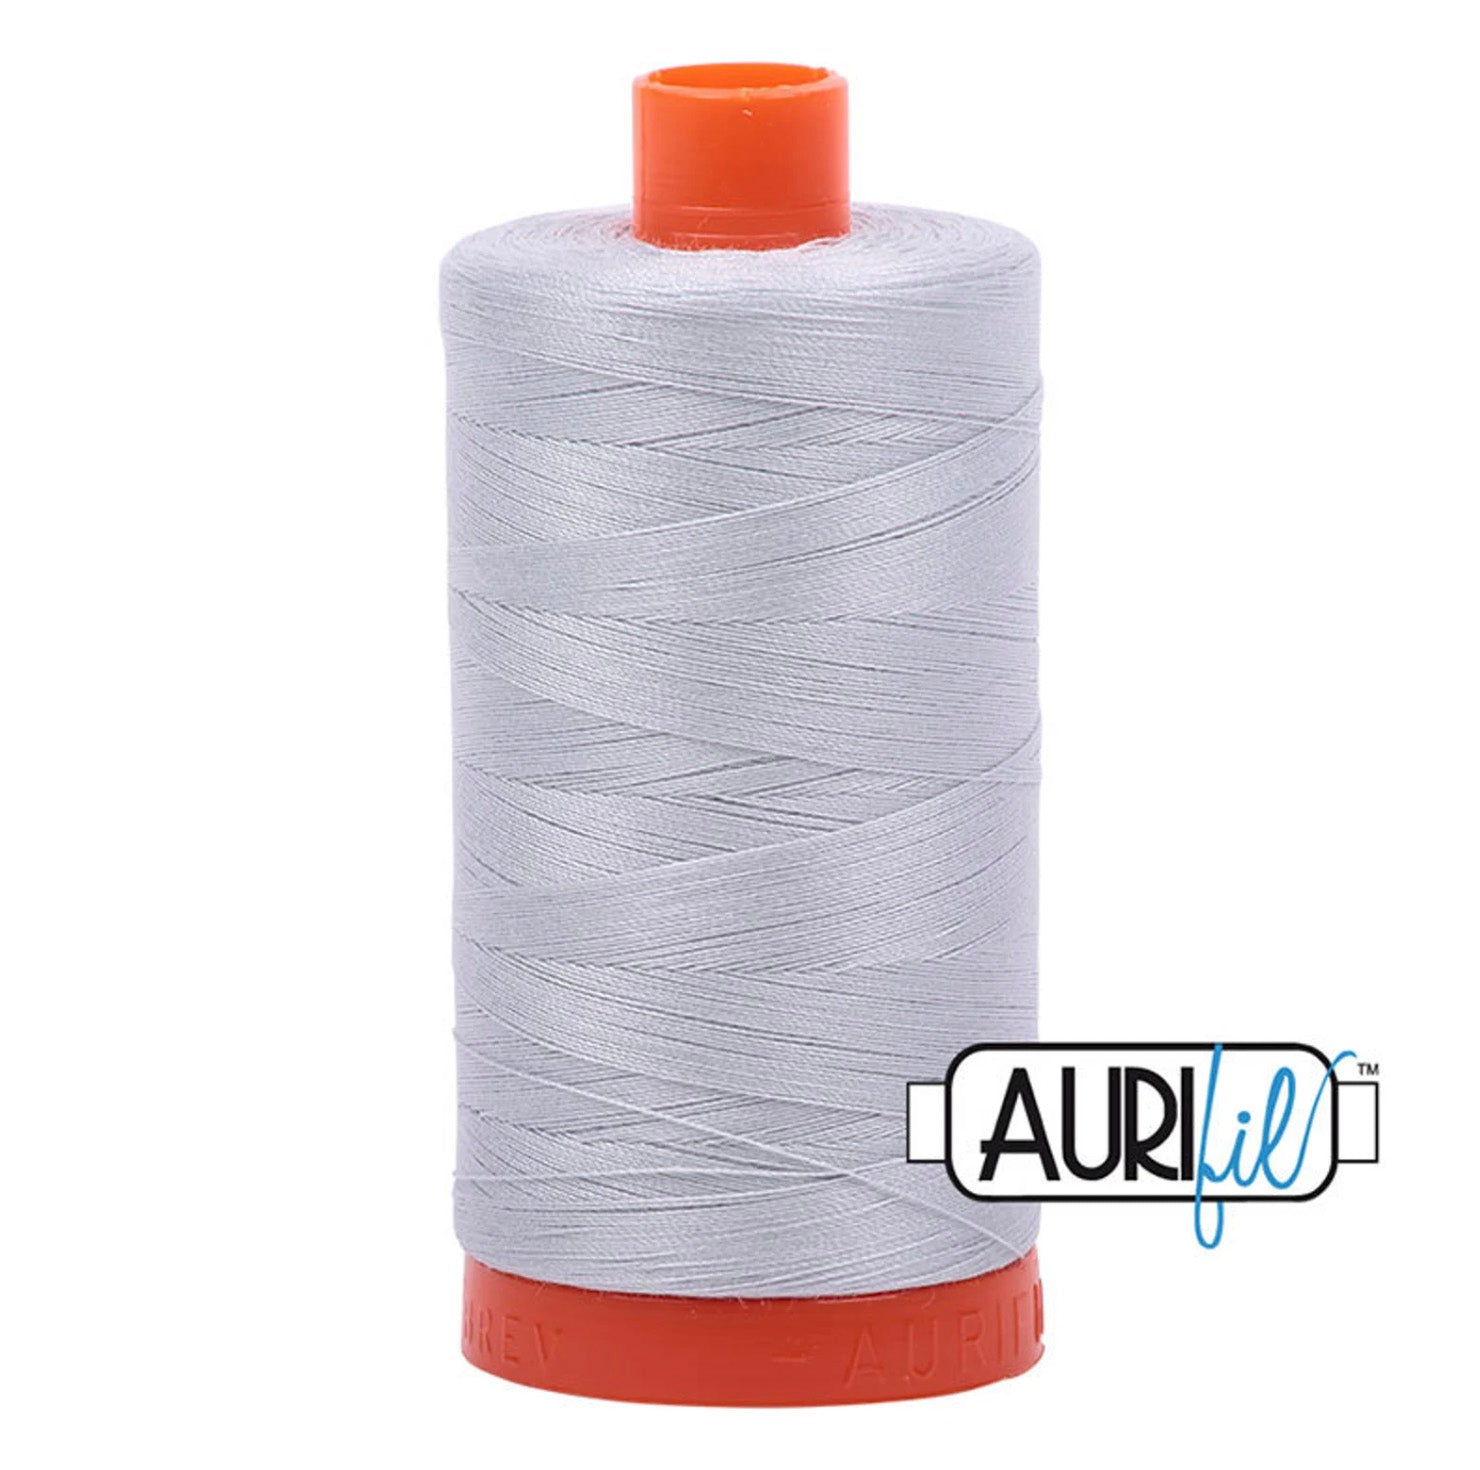 Large spool of aurifil thread in dove gray 2600